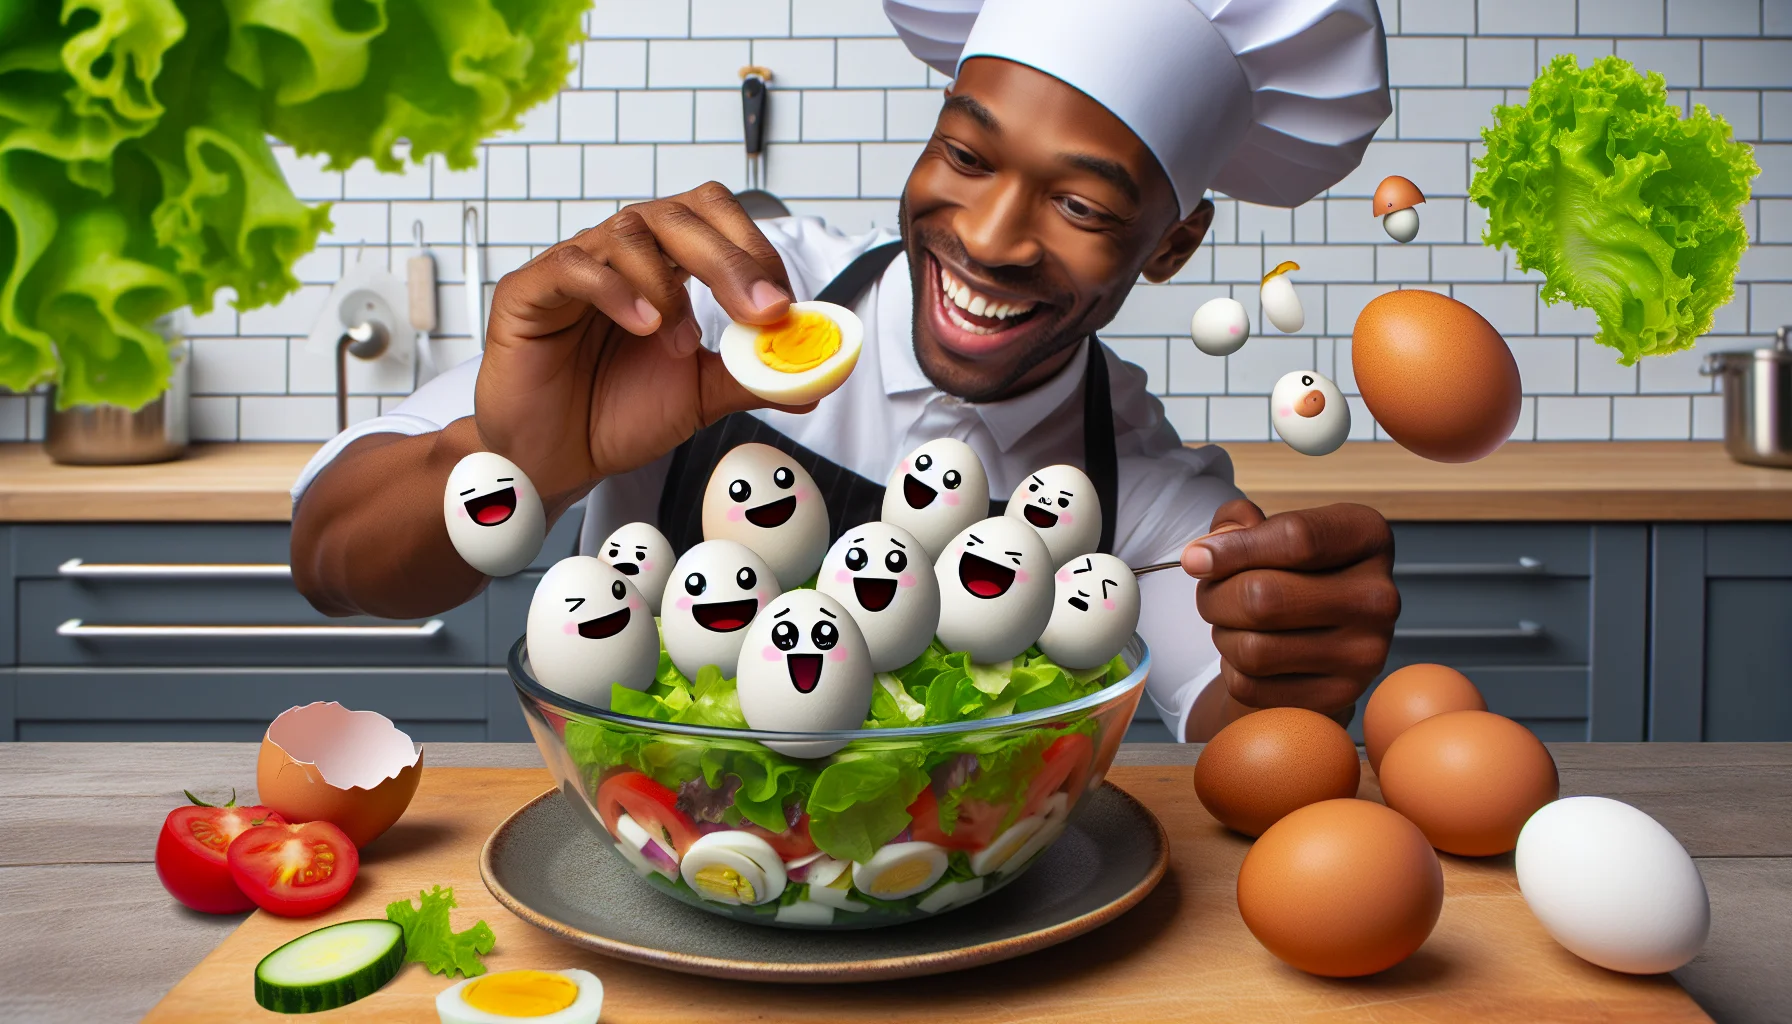 Generate a detailed and realistic image showing the process of making a delicious, cost-effective egg salad without mayo. The scene should have a humorous touch, maybe with a male Black chef wearing a ridiculous hat creating the salad, cheerily putting boiled eggs, fresh lettuce and other ingredients in a clear bowl. As a lighter touch, perhaps animate the ingredients by giving them cute, amazed facial expressions as they go into the mixing bowl. Include a tagline saying 'Healthy Eating for Less!' as a compelling message enticing people towards wholesome, affordable meals.